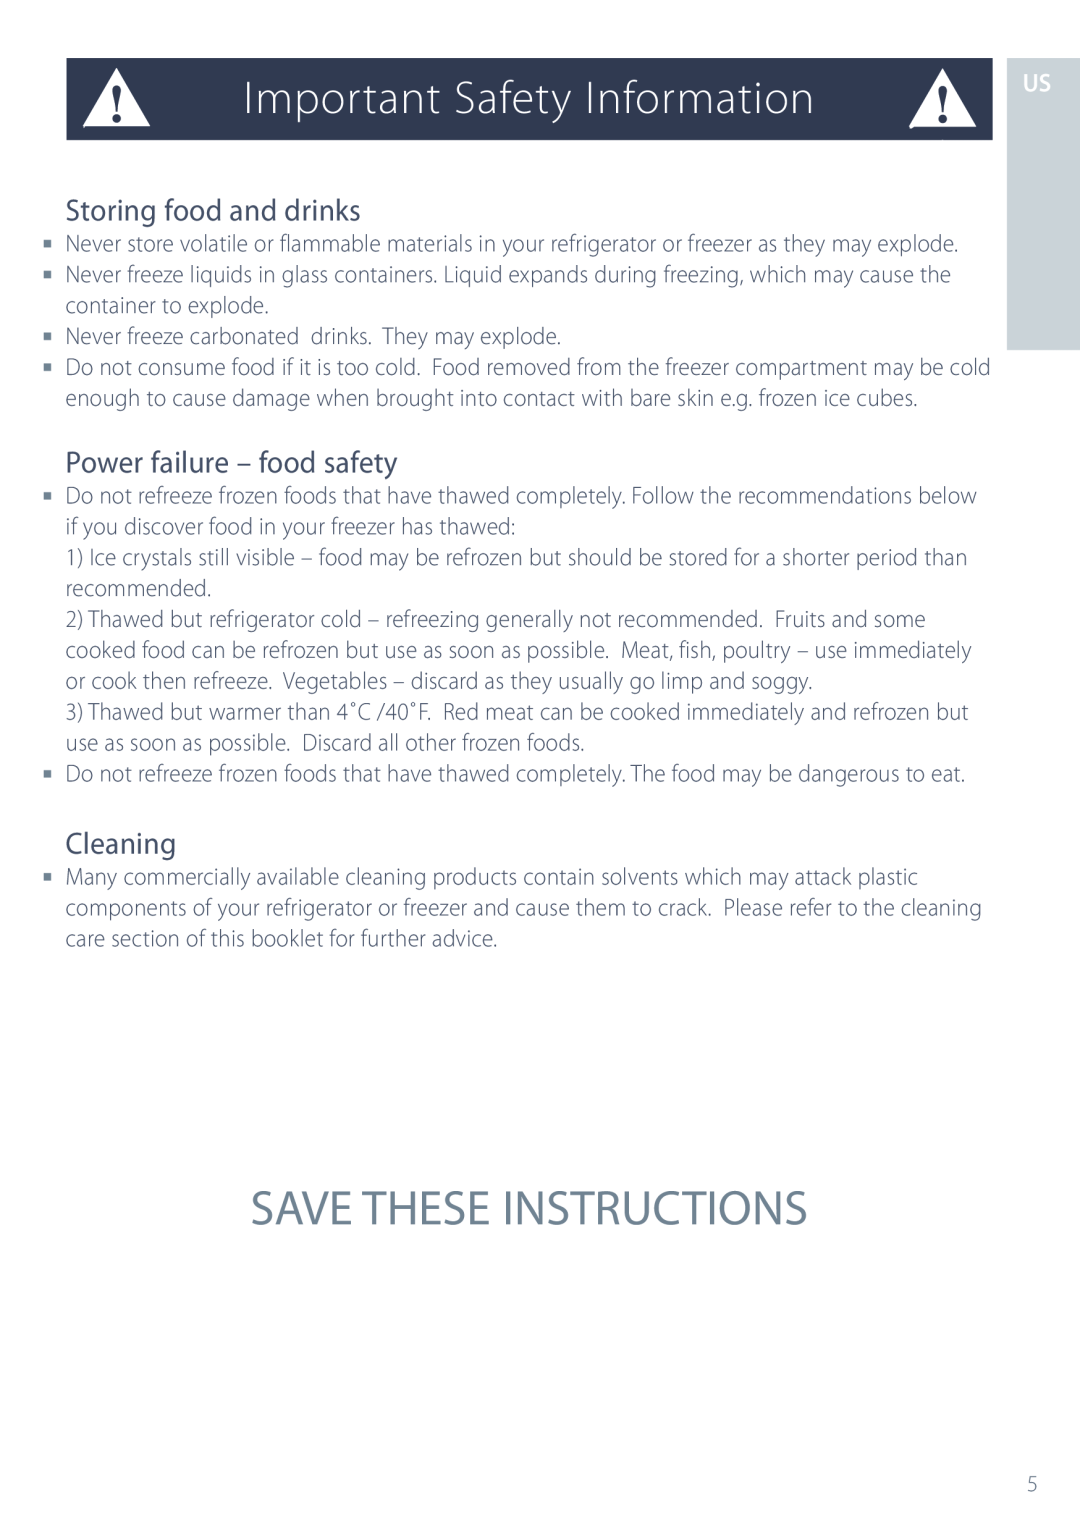 Fisher & Paykel ActiveSmart manual Save These Instructions, Storing food and drinks, Power failure - food safety, Cleaning 